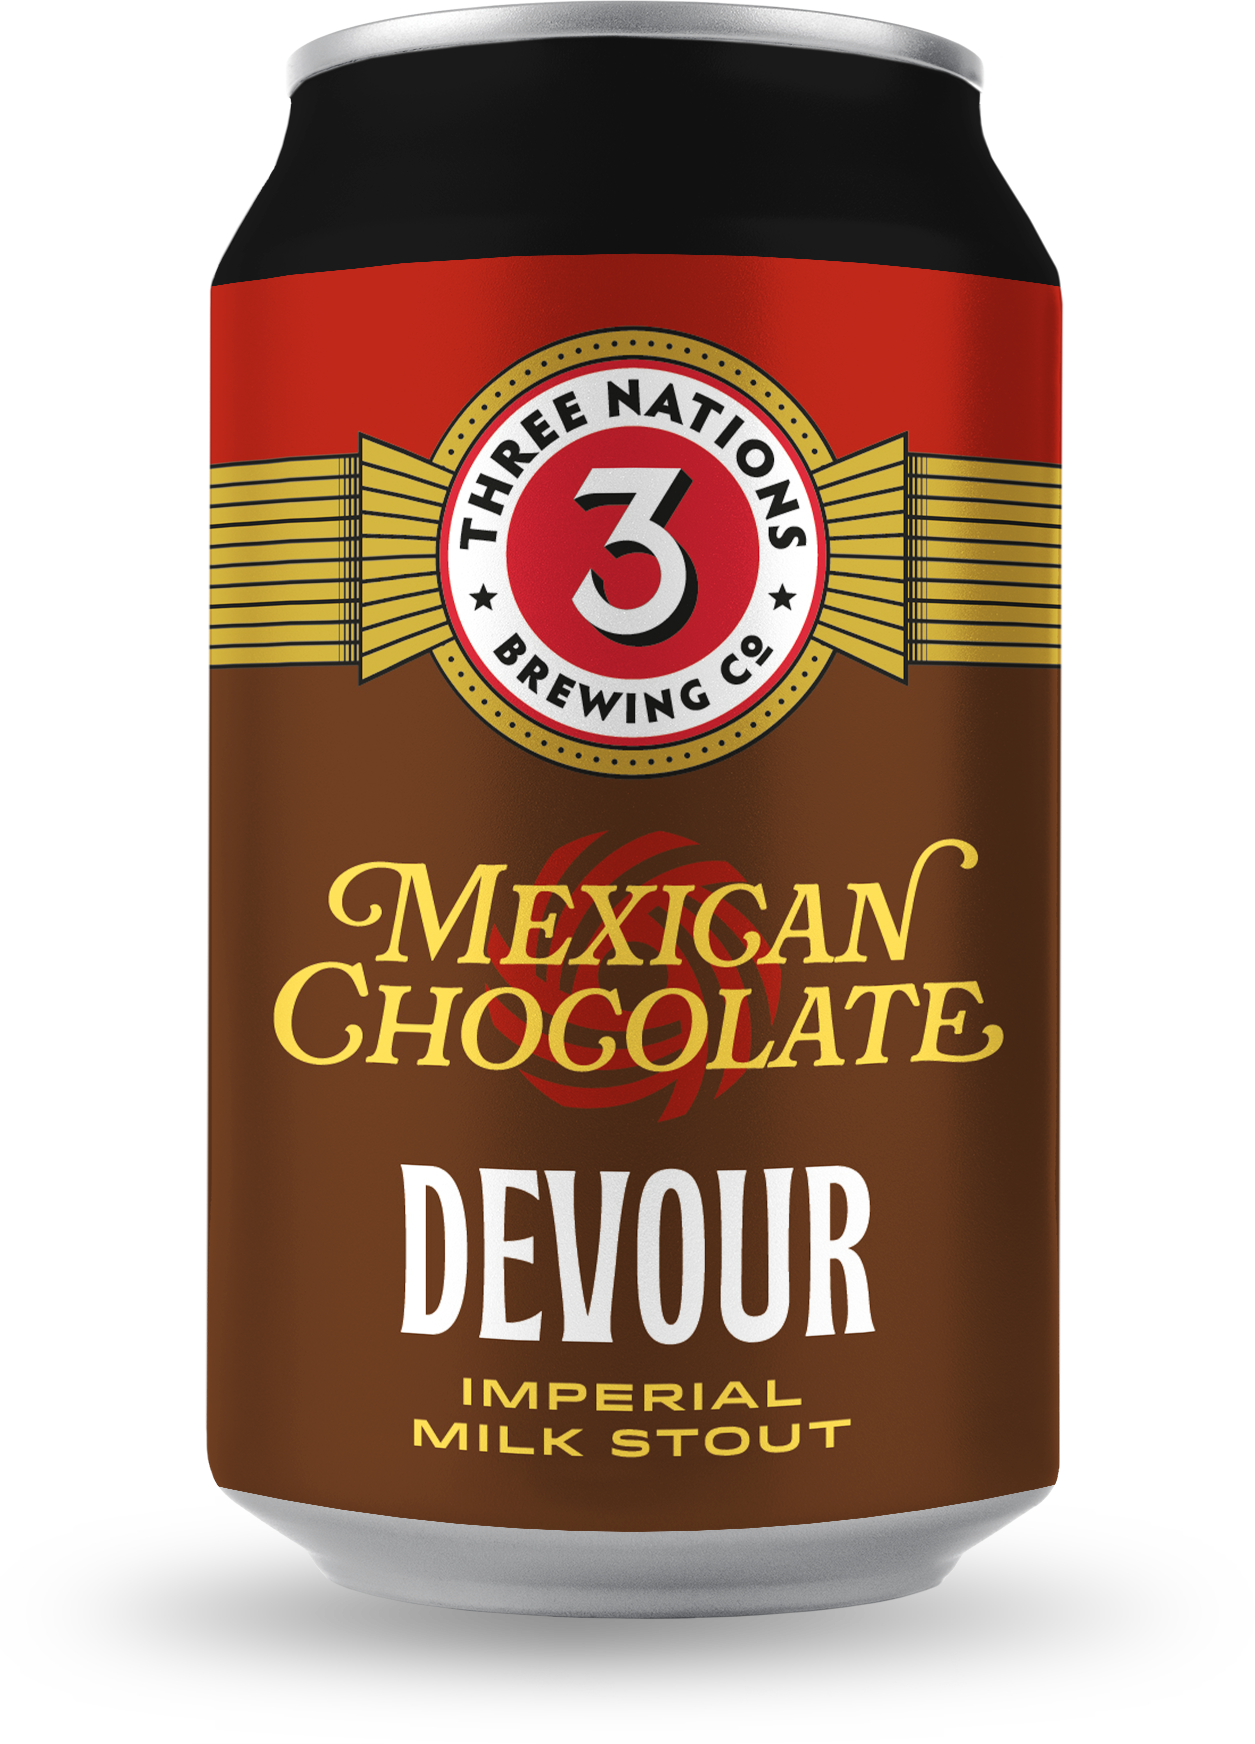 3 nations brewings mexican chocolate can design